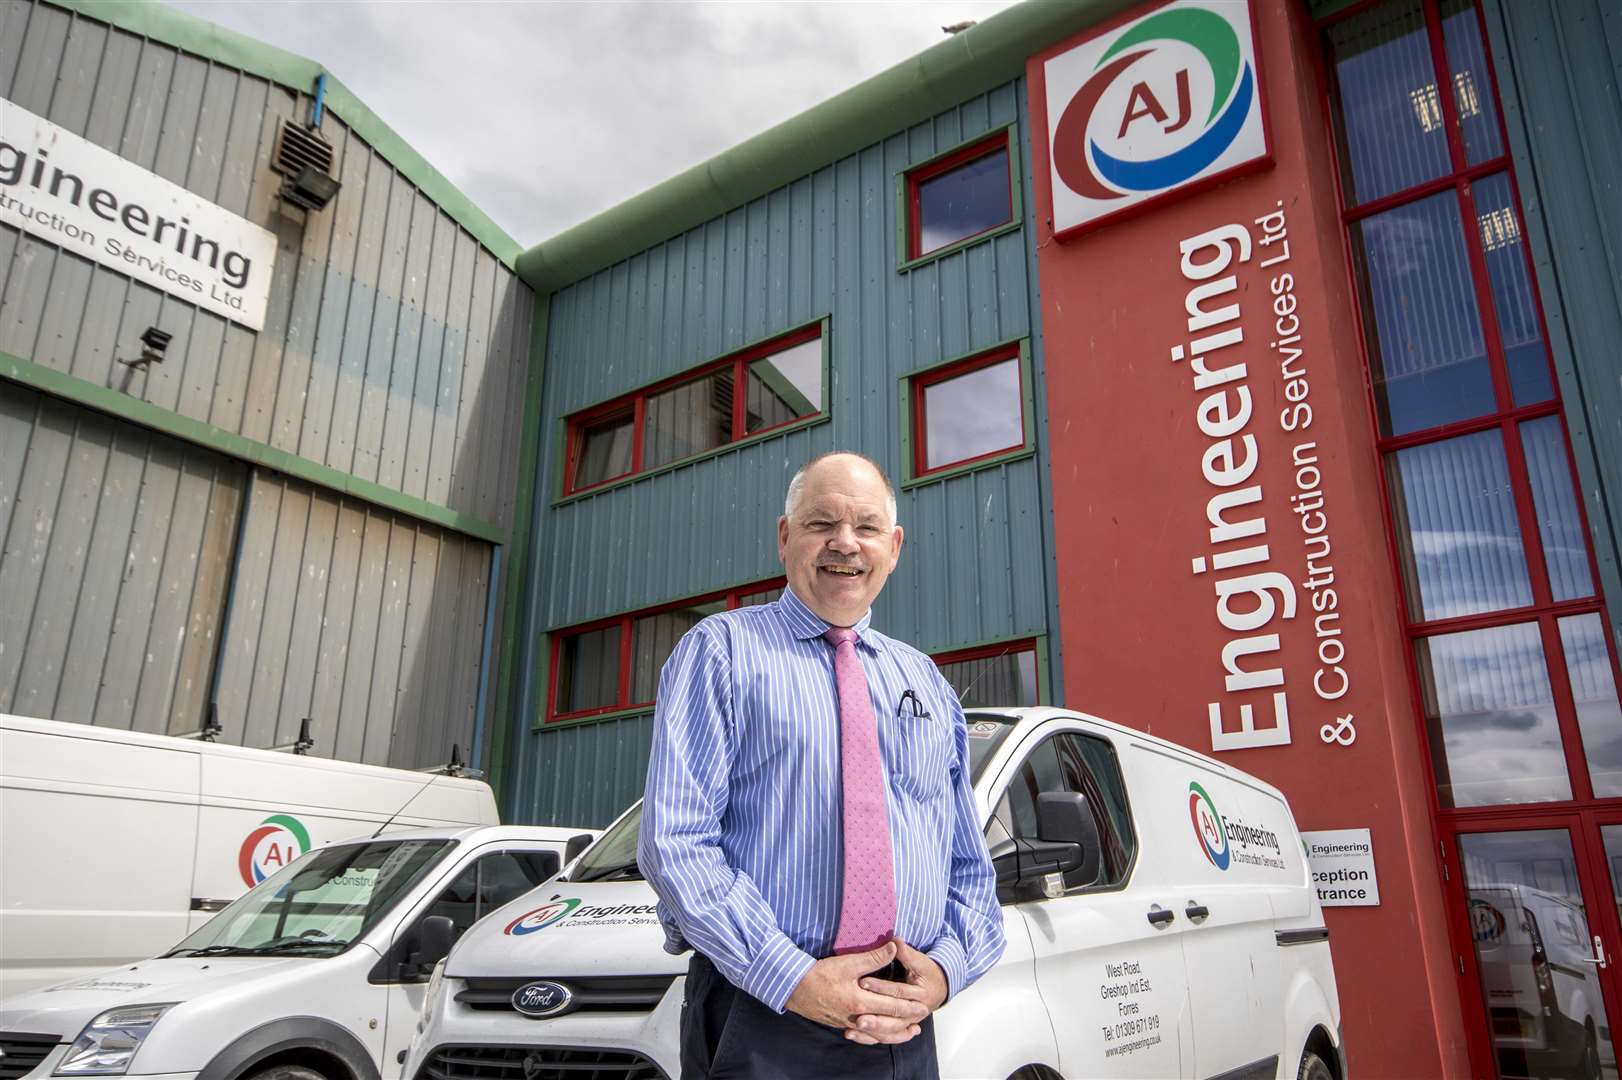 Managing direct of AJ Engineering and Construction Services, Alan James. Picture: Marc Hindley, Chit Chat PR & Digital